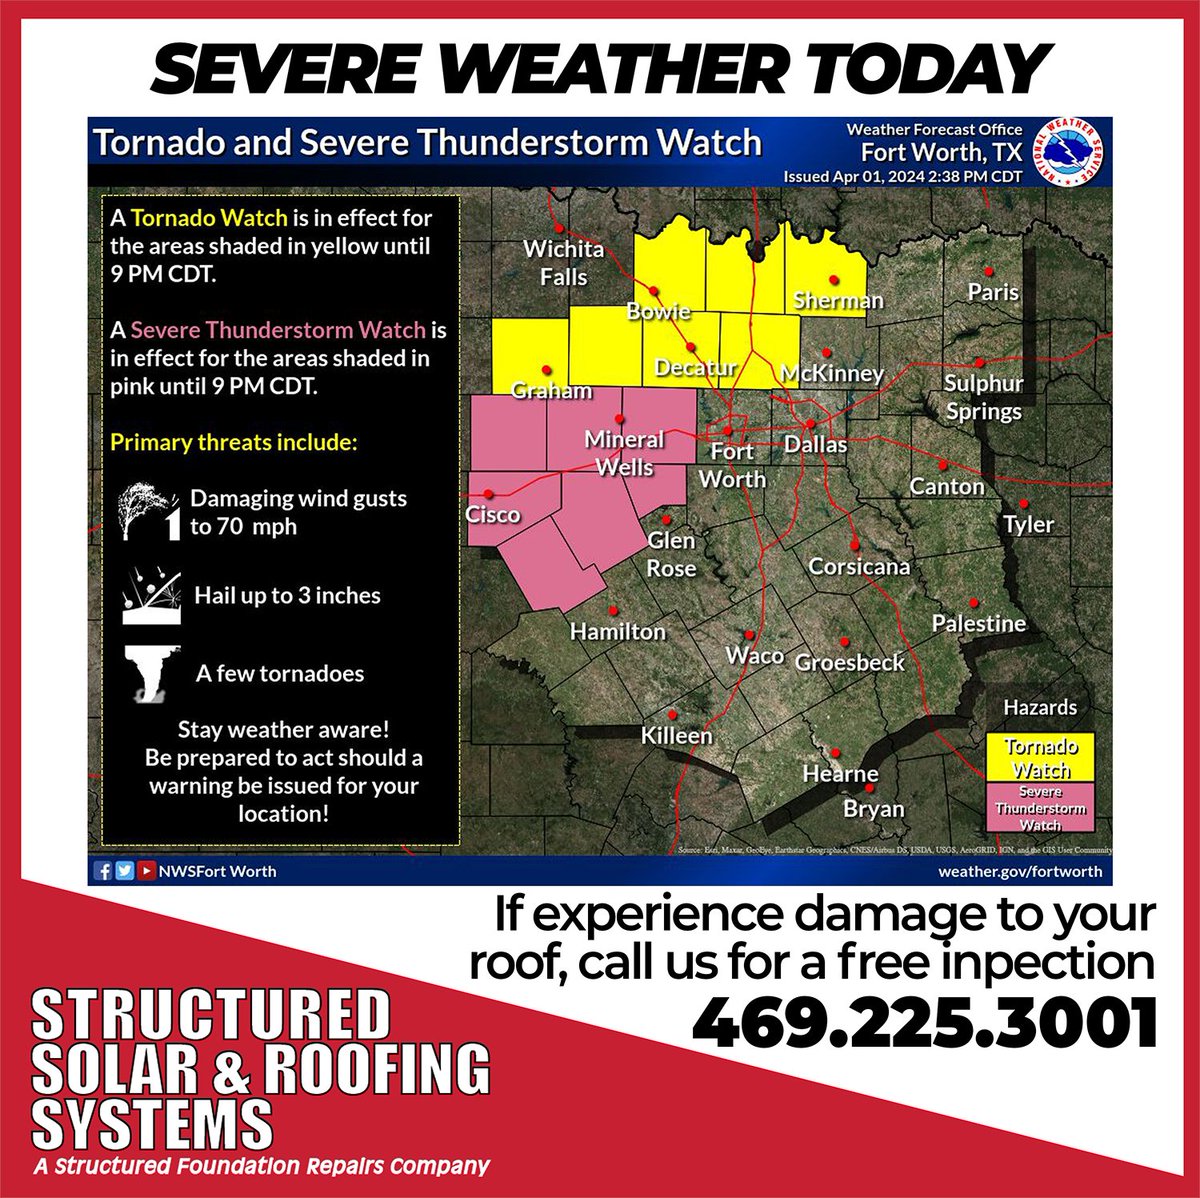 Info as of 5pm CST: NWS updated the 4cast for this evening to incl. severe weather in NTX: possible high winds, hail, & tornadoes. If you suspect roof damage after call us to schedule a free inspection.  469.225.3001

Stay safe, everyone! 

#weatheraware #northtexas #roofdamage